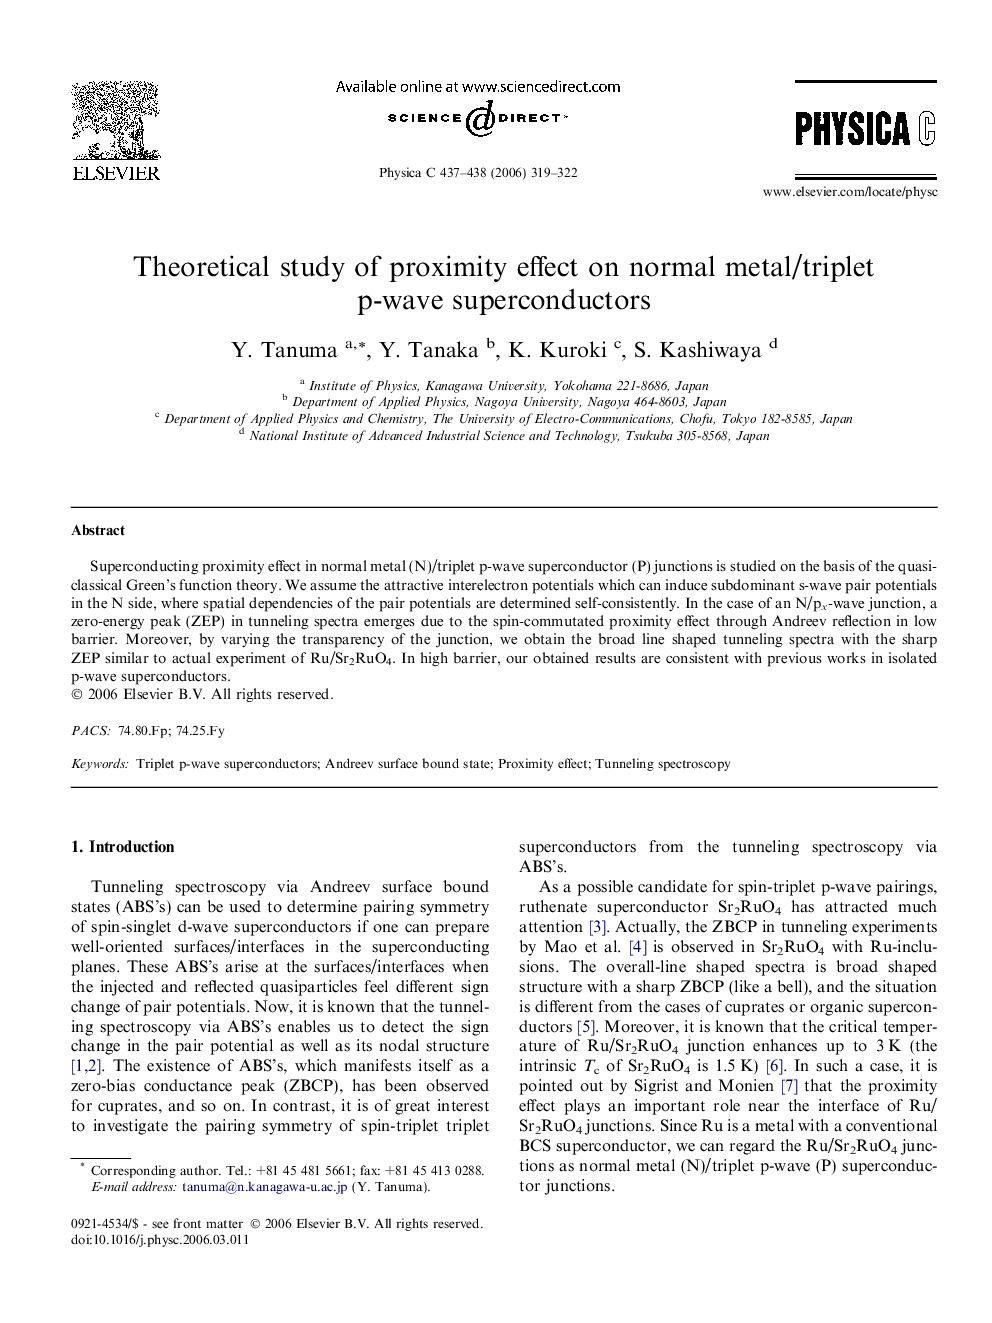 Theoretical study of proximity effect on normal metal/triplet p-wave superconductors